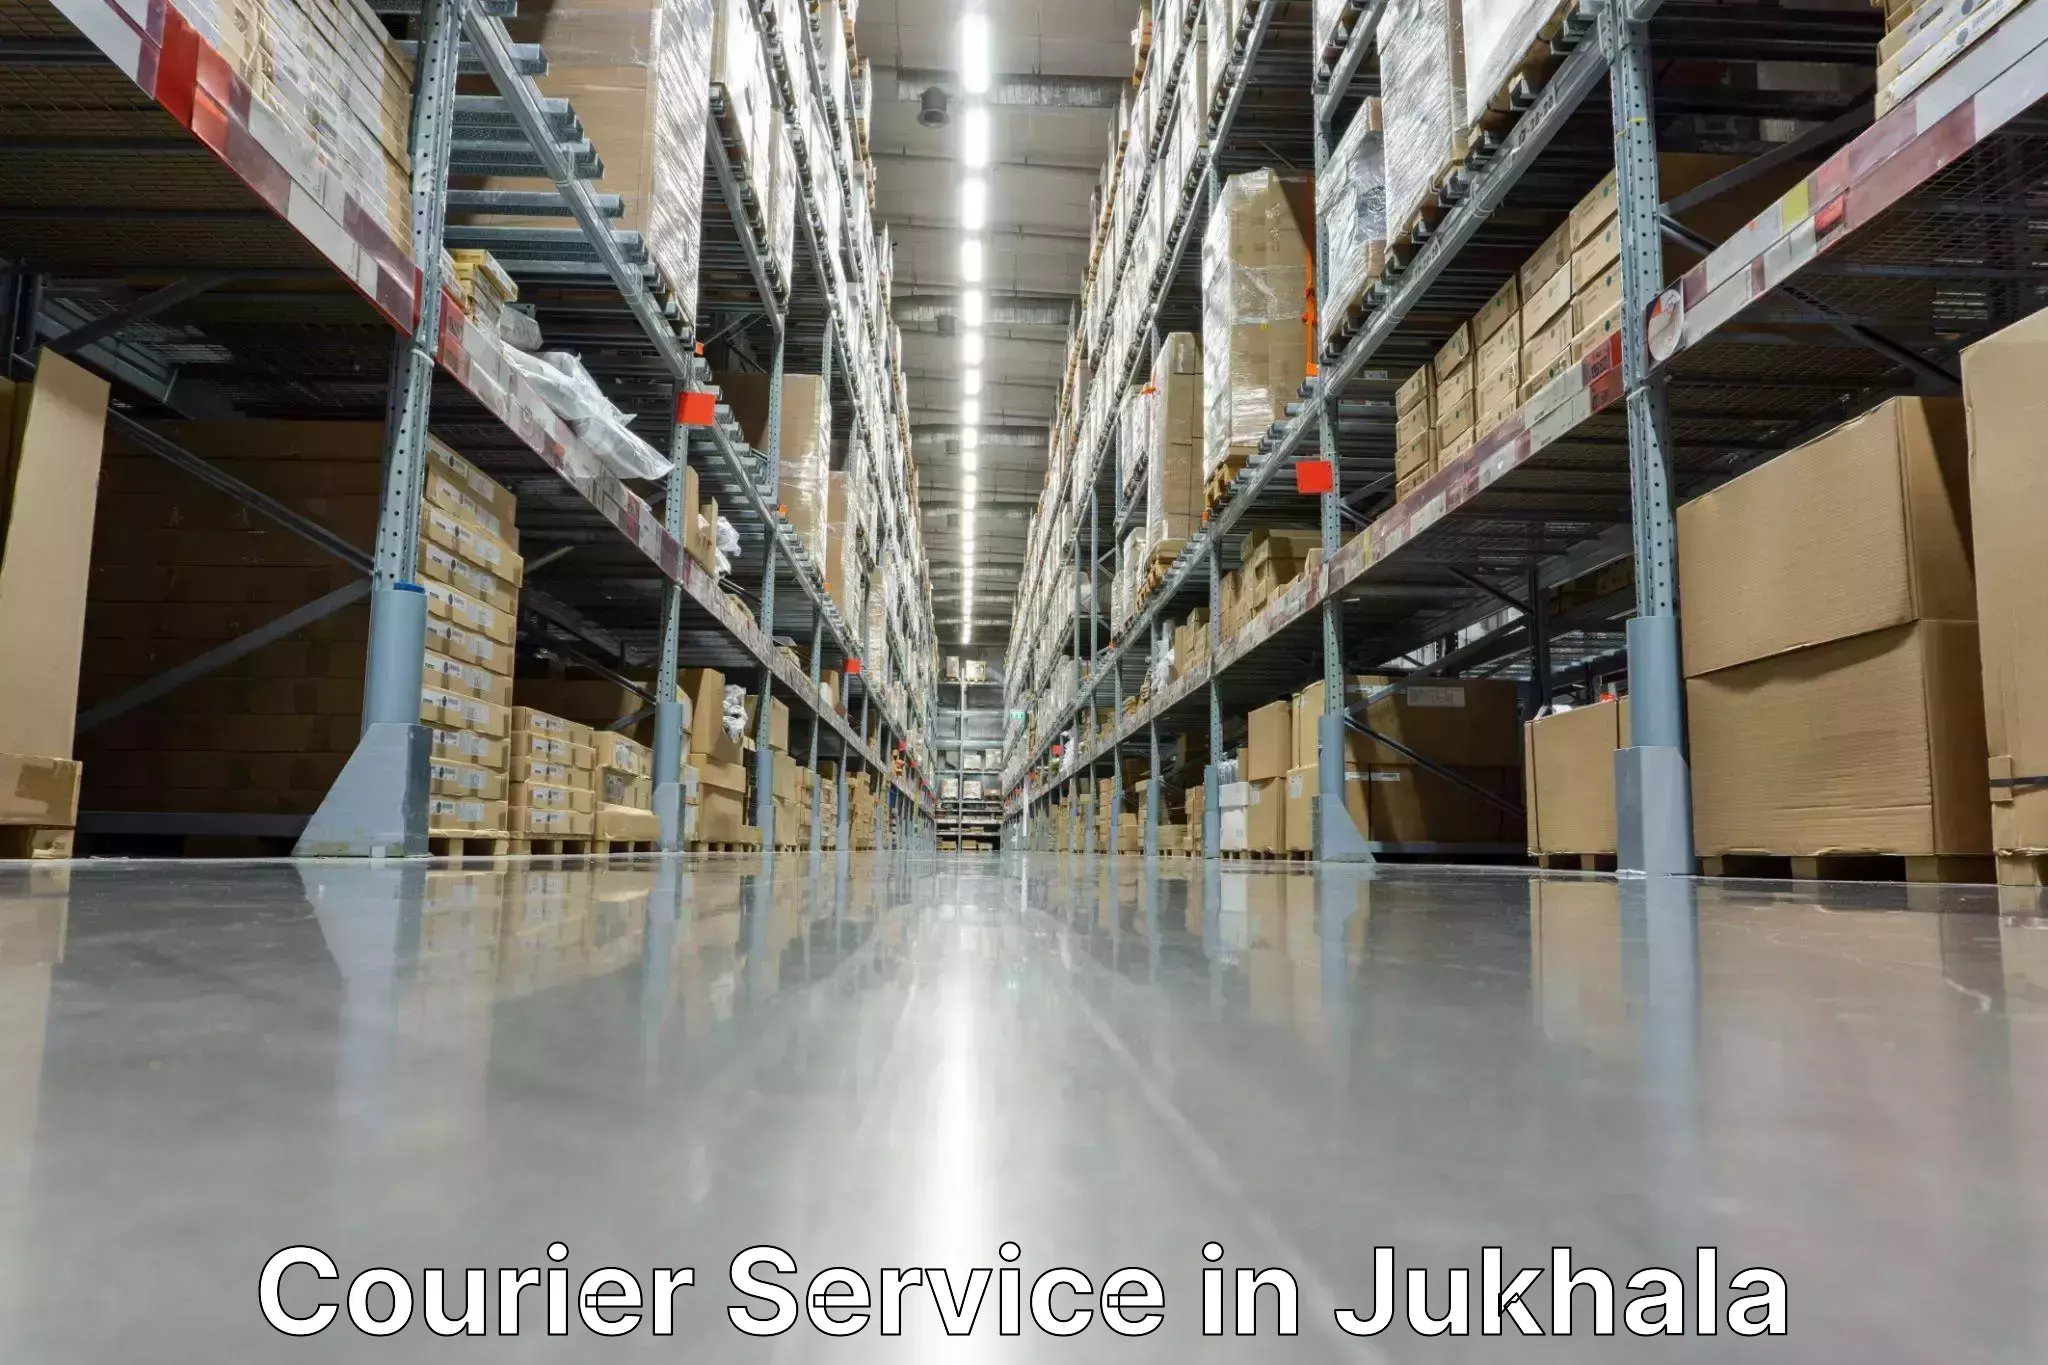 Quality courier services in Jukhala